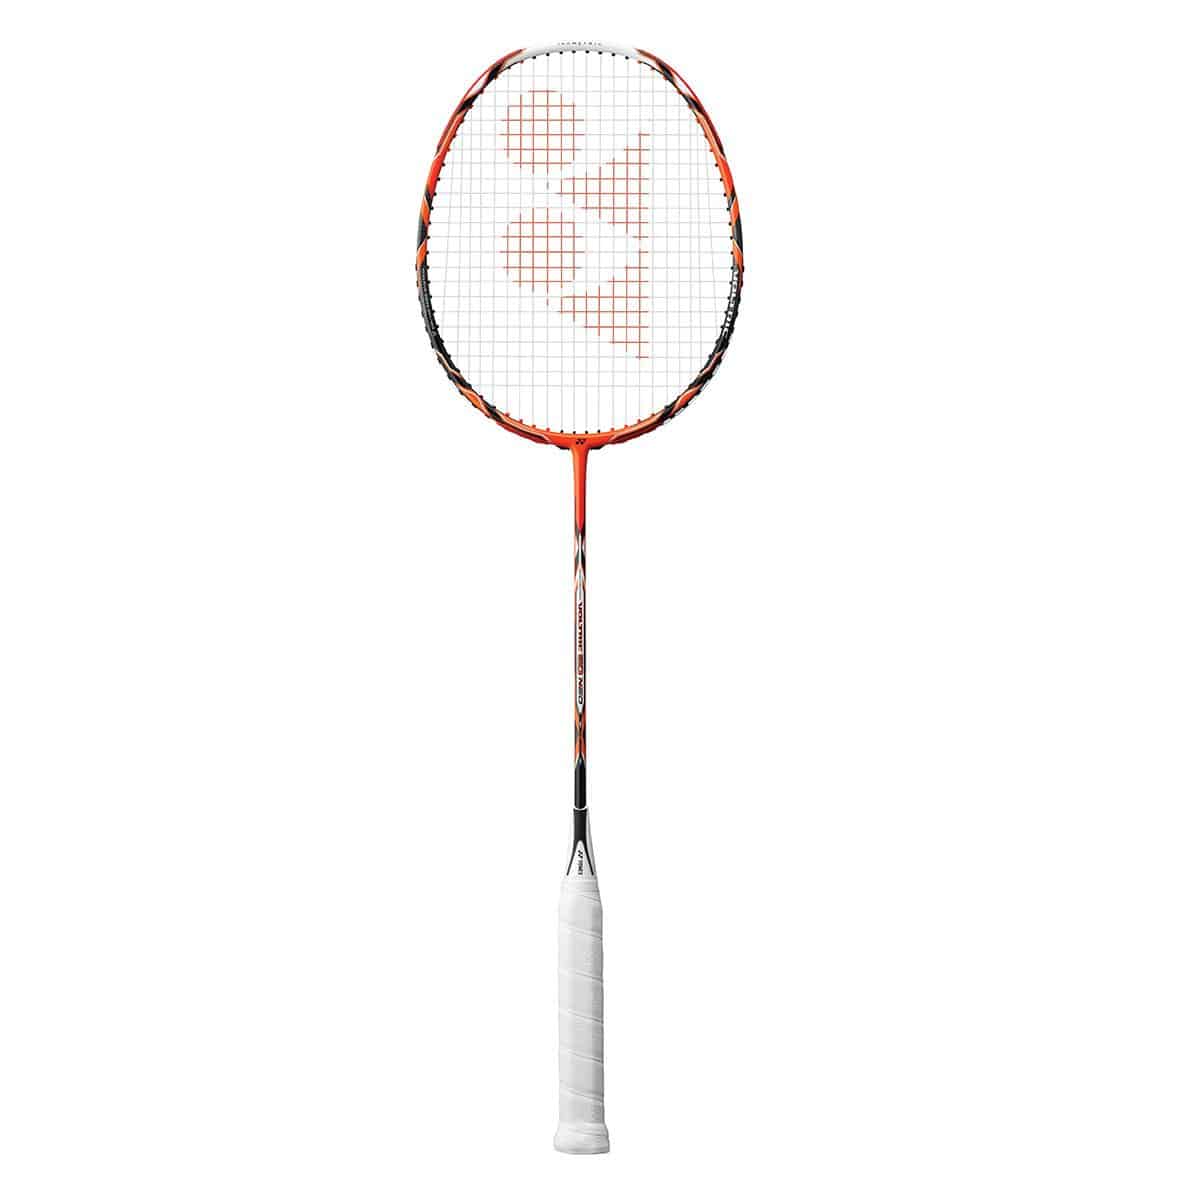 Shop Yonex with a guarantee and fast delivery in the UAE and Saudi Arabia